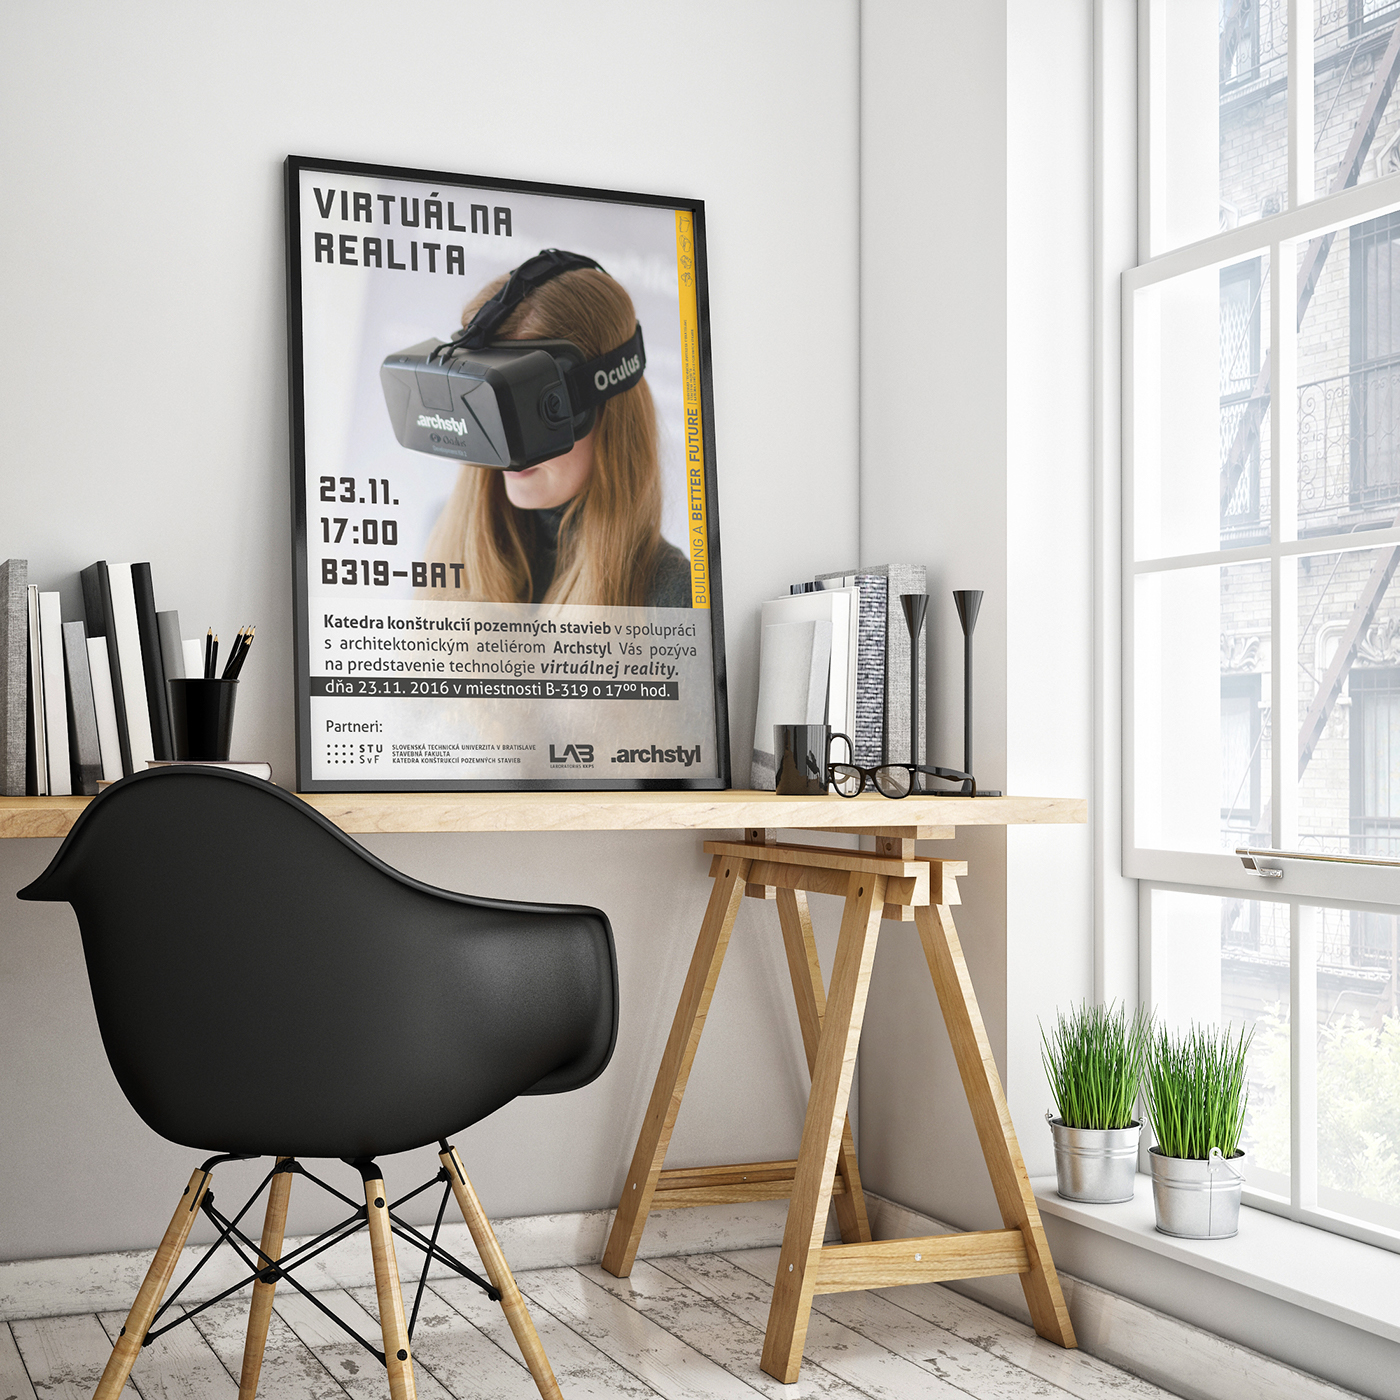 virtual reality Event poster girl vr headset